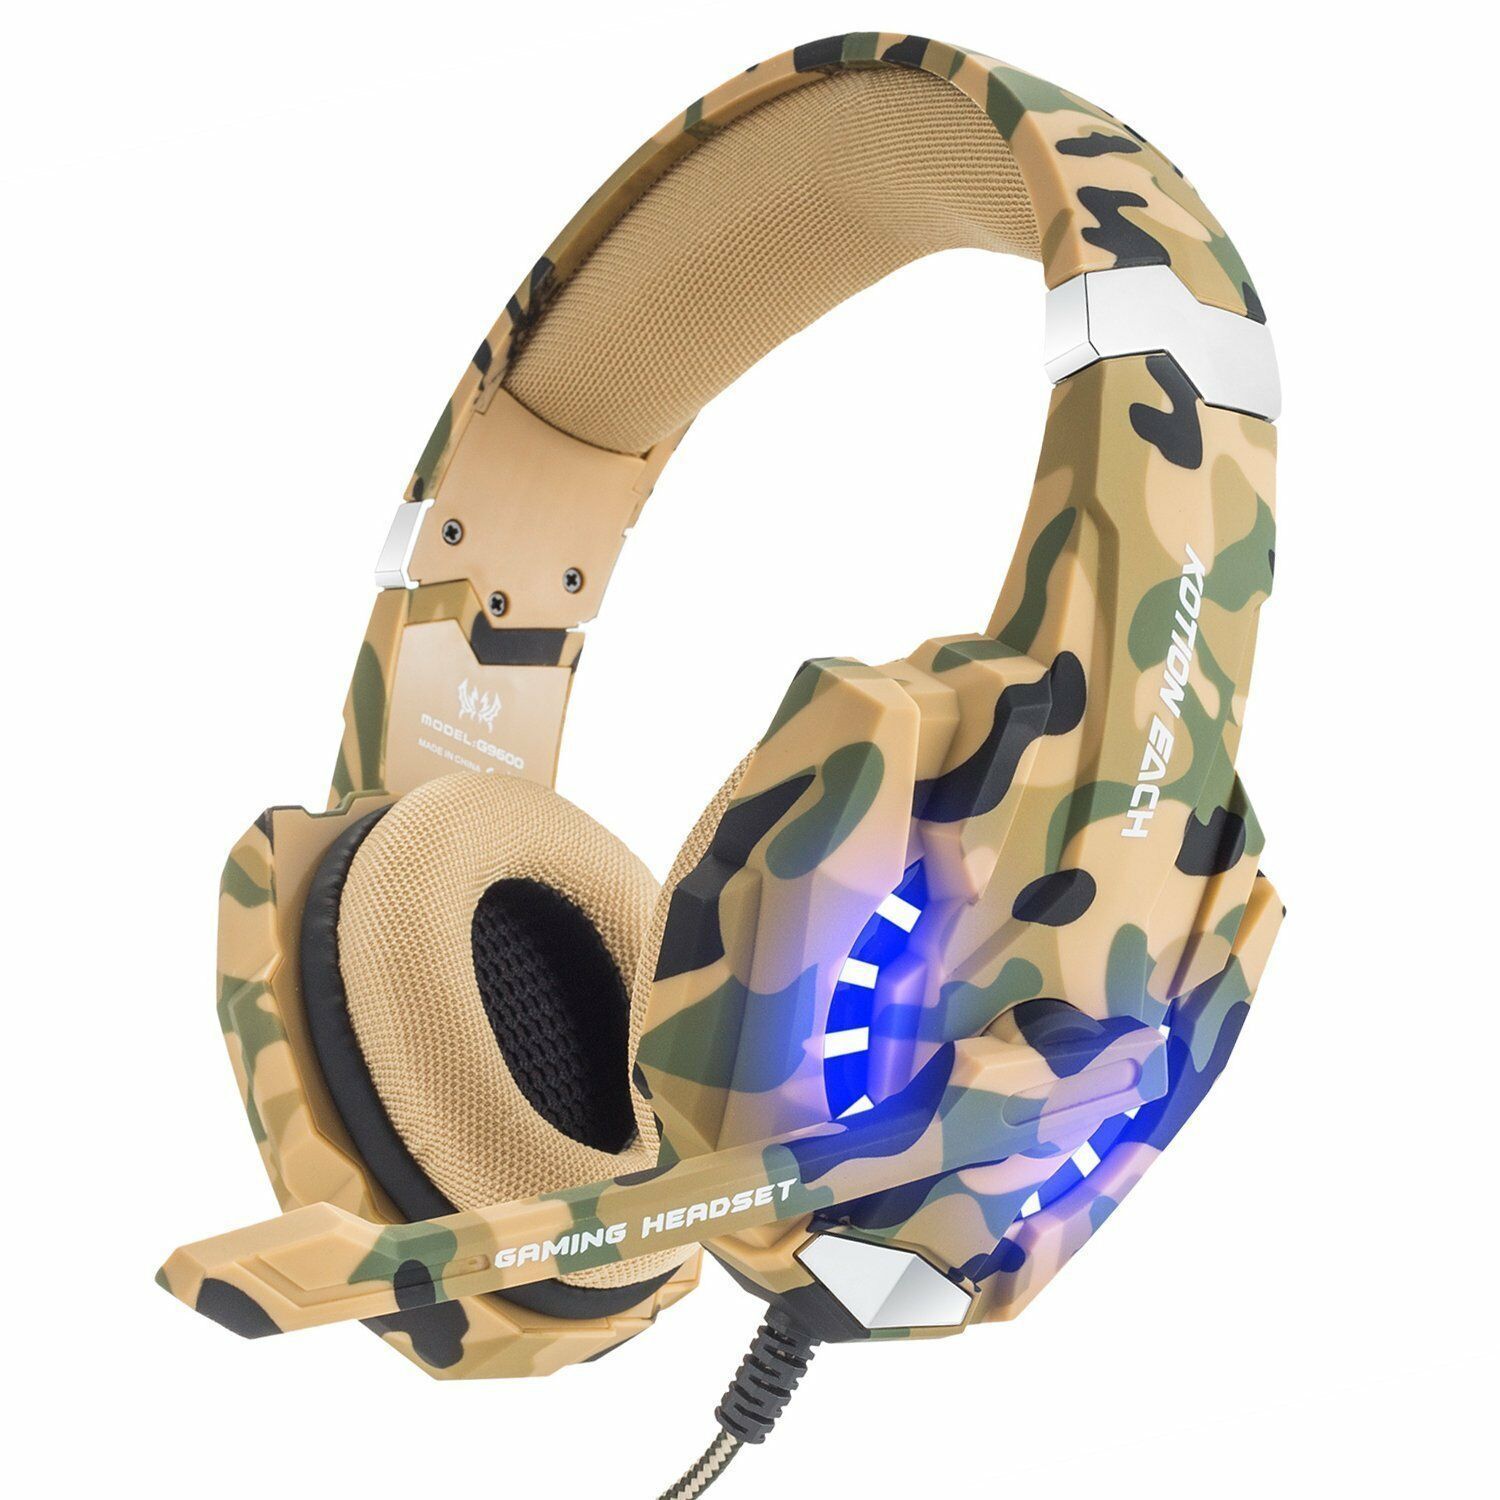 Professional Gaming Headset Microphone LED Light ps4 PC Smartphone